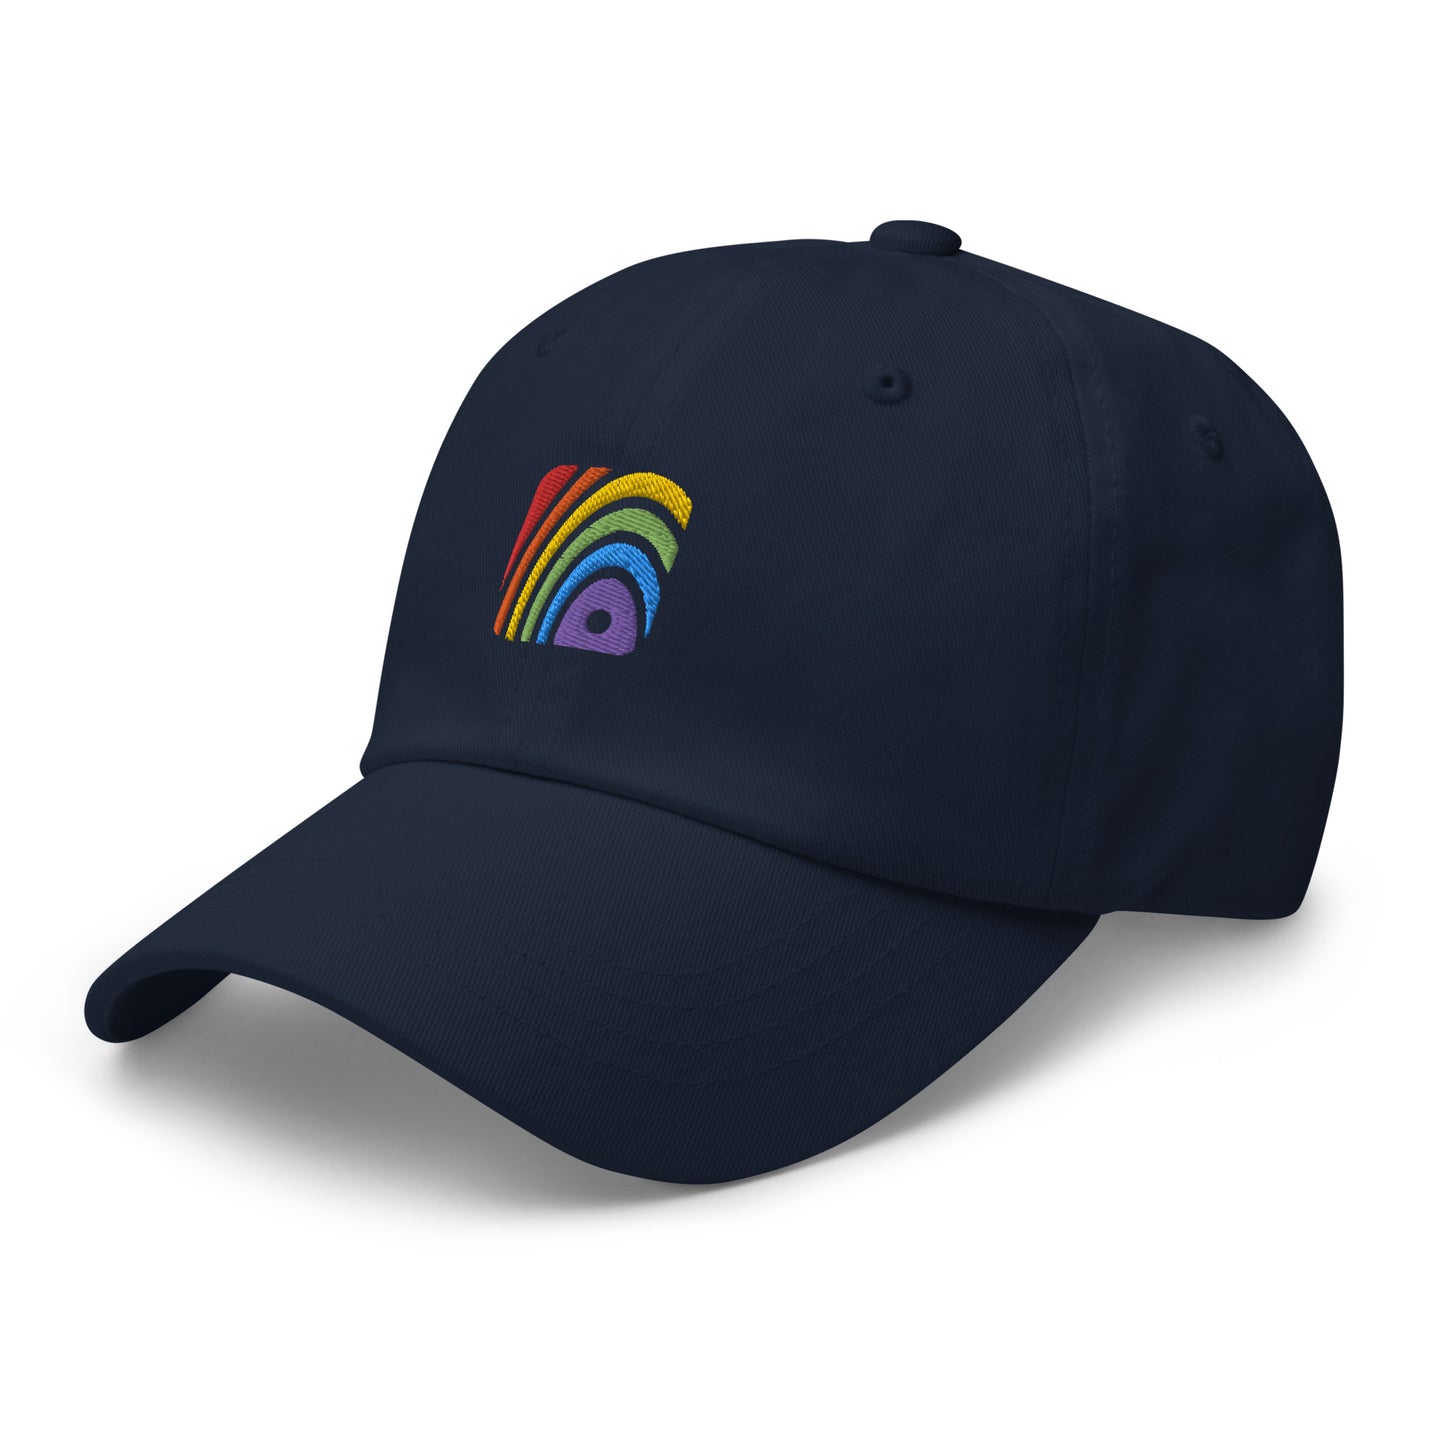 Navy baseball hat featuring rainbow design embroidery with a low profile, adjustable strap.